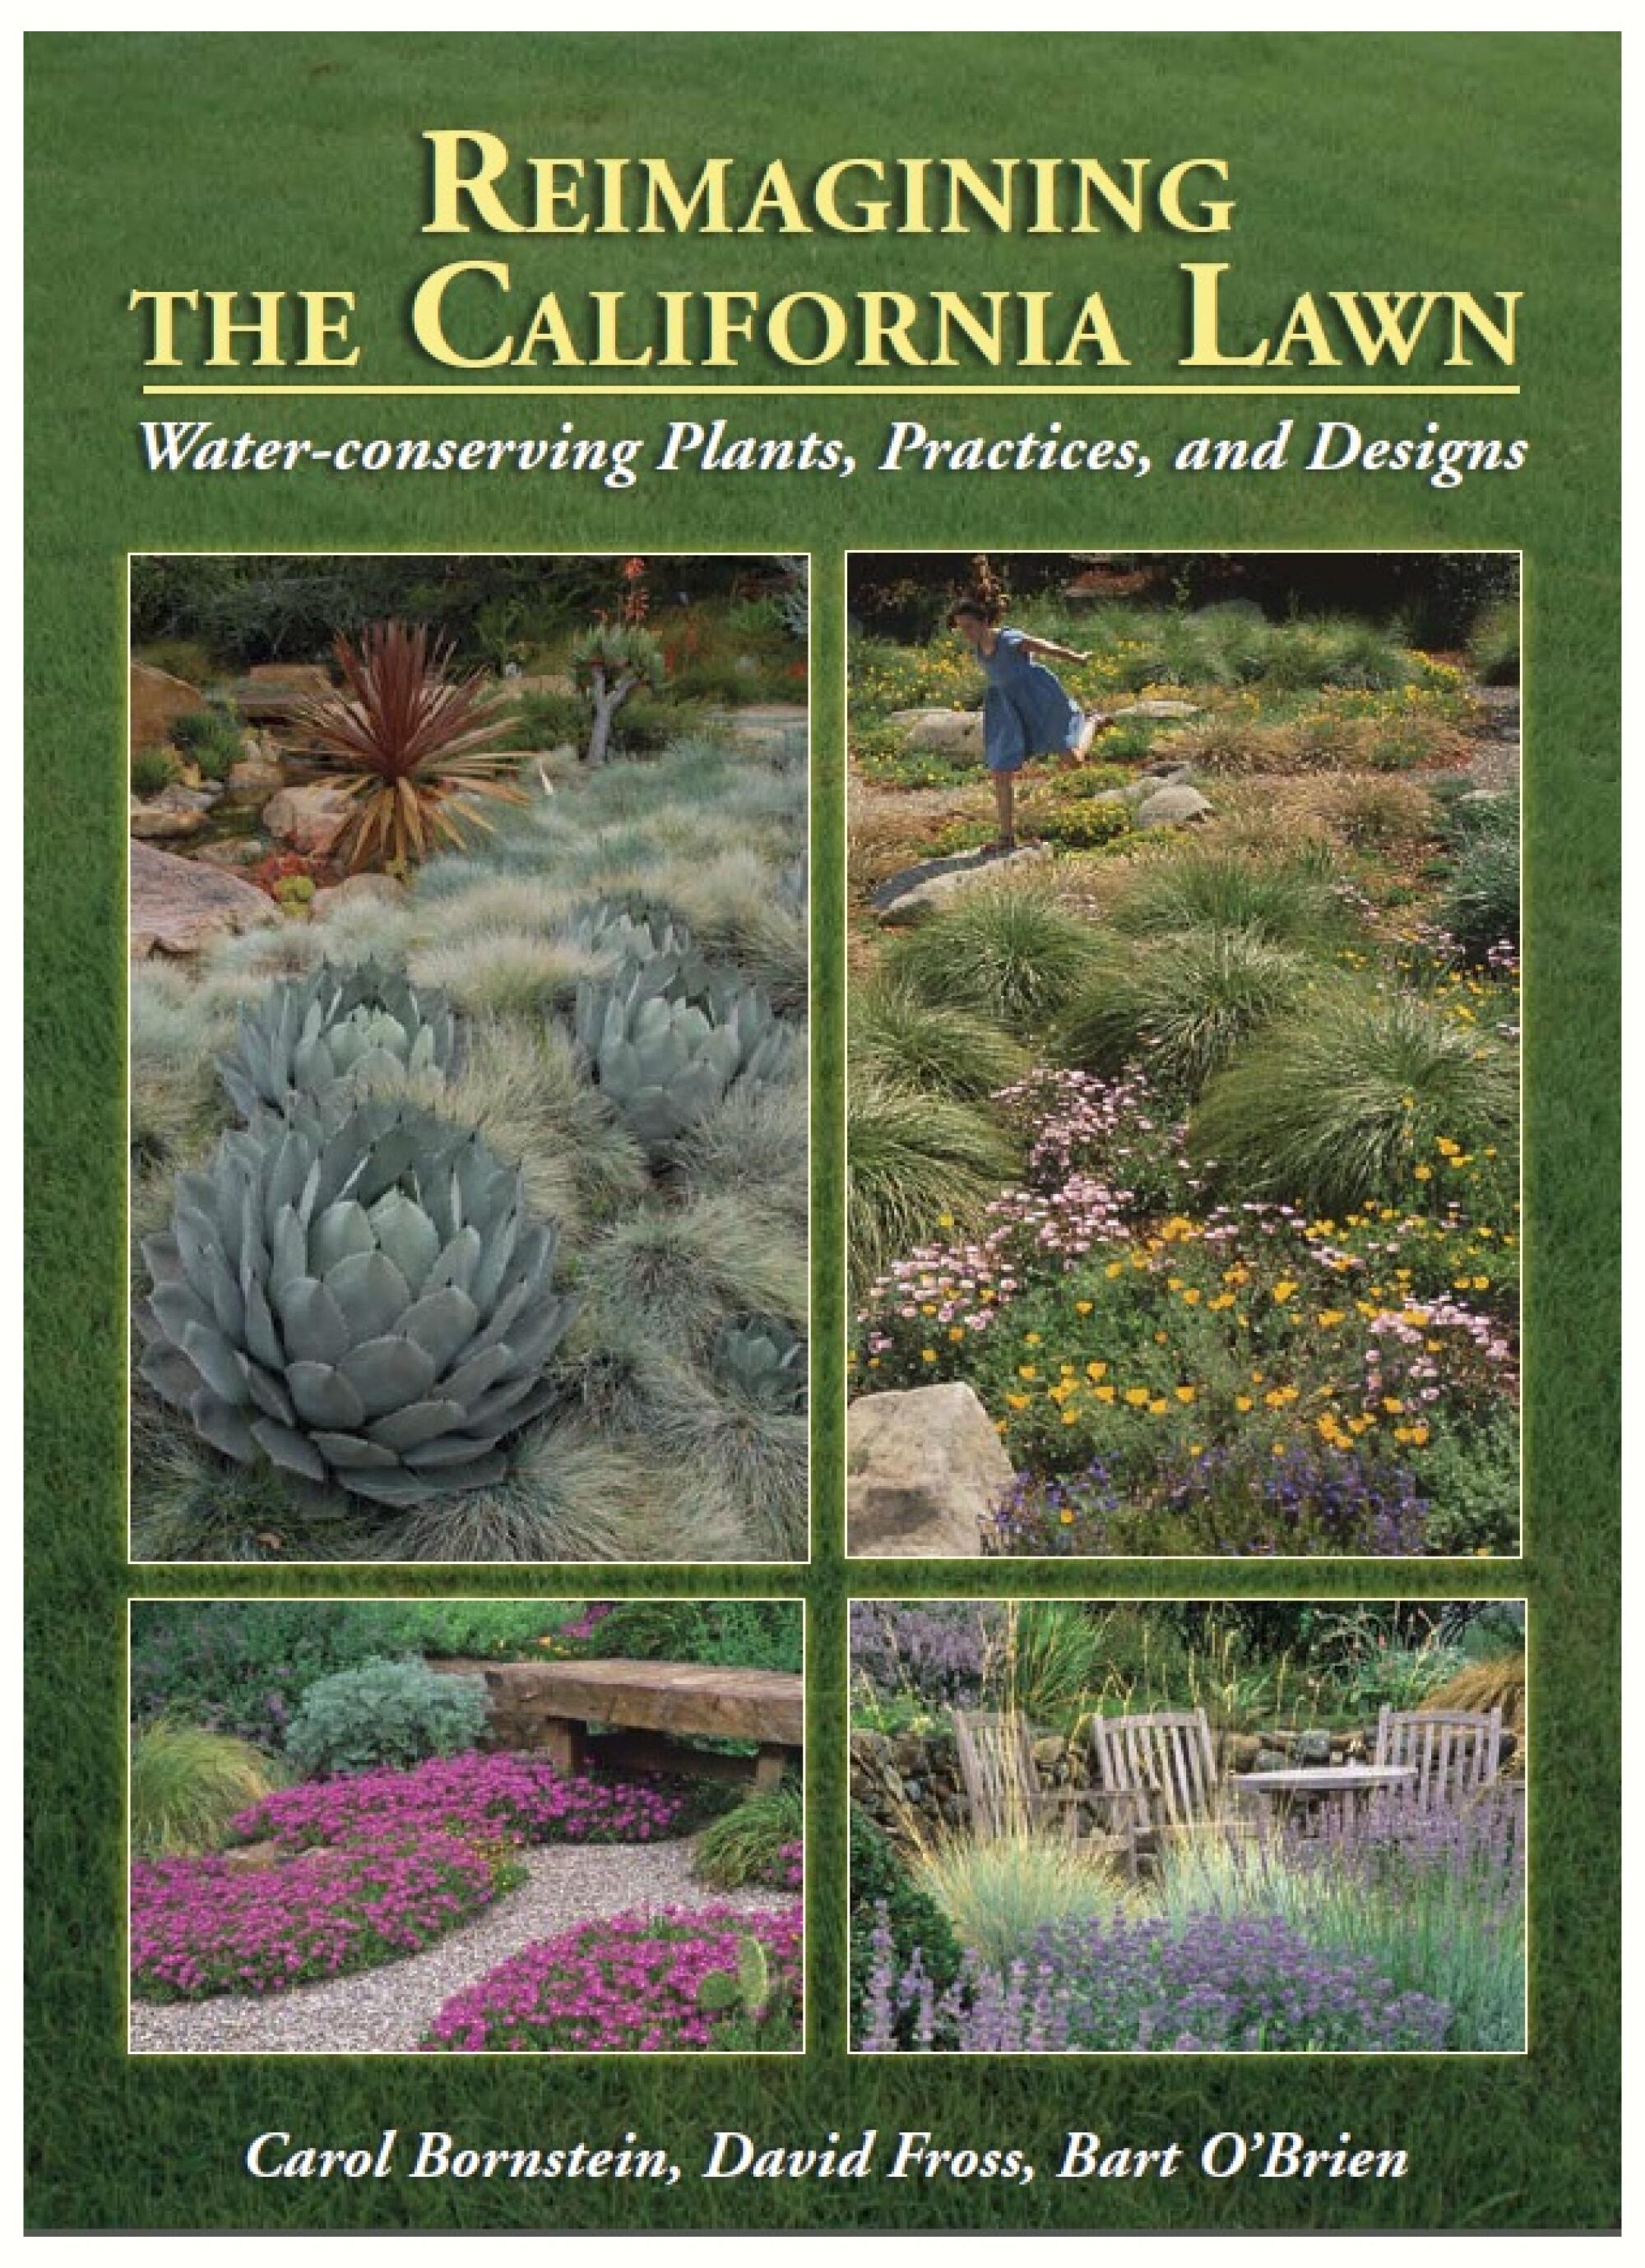 "Reimagining the California Lawn: Water-conserving Plants, Practices, and Designs" 